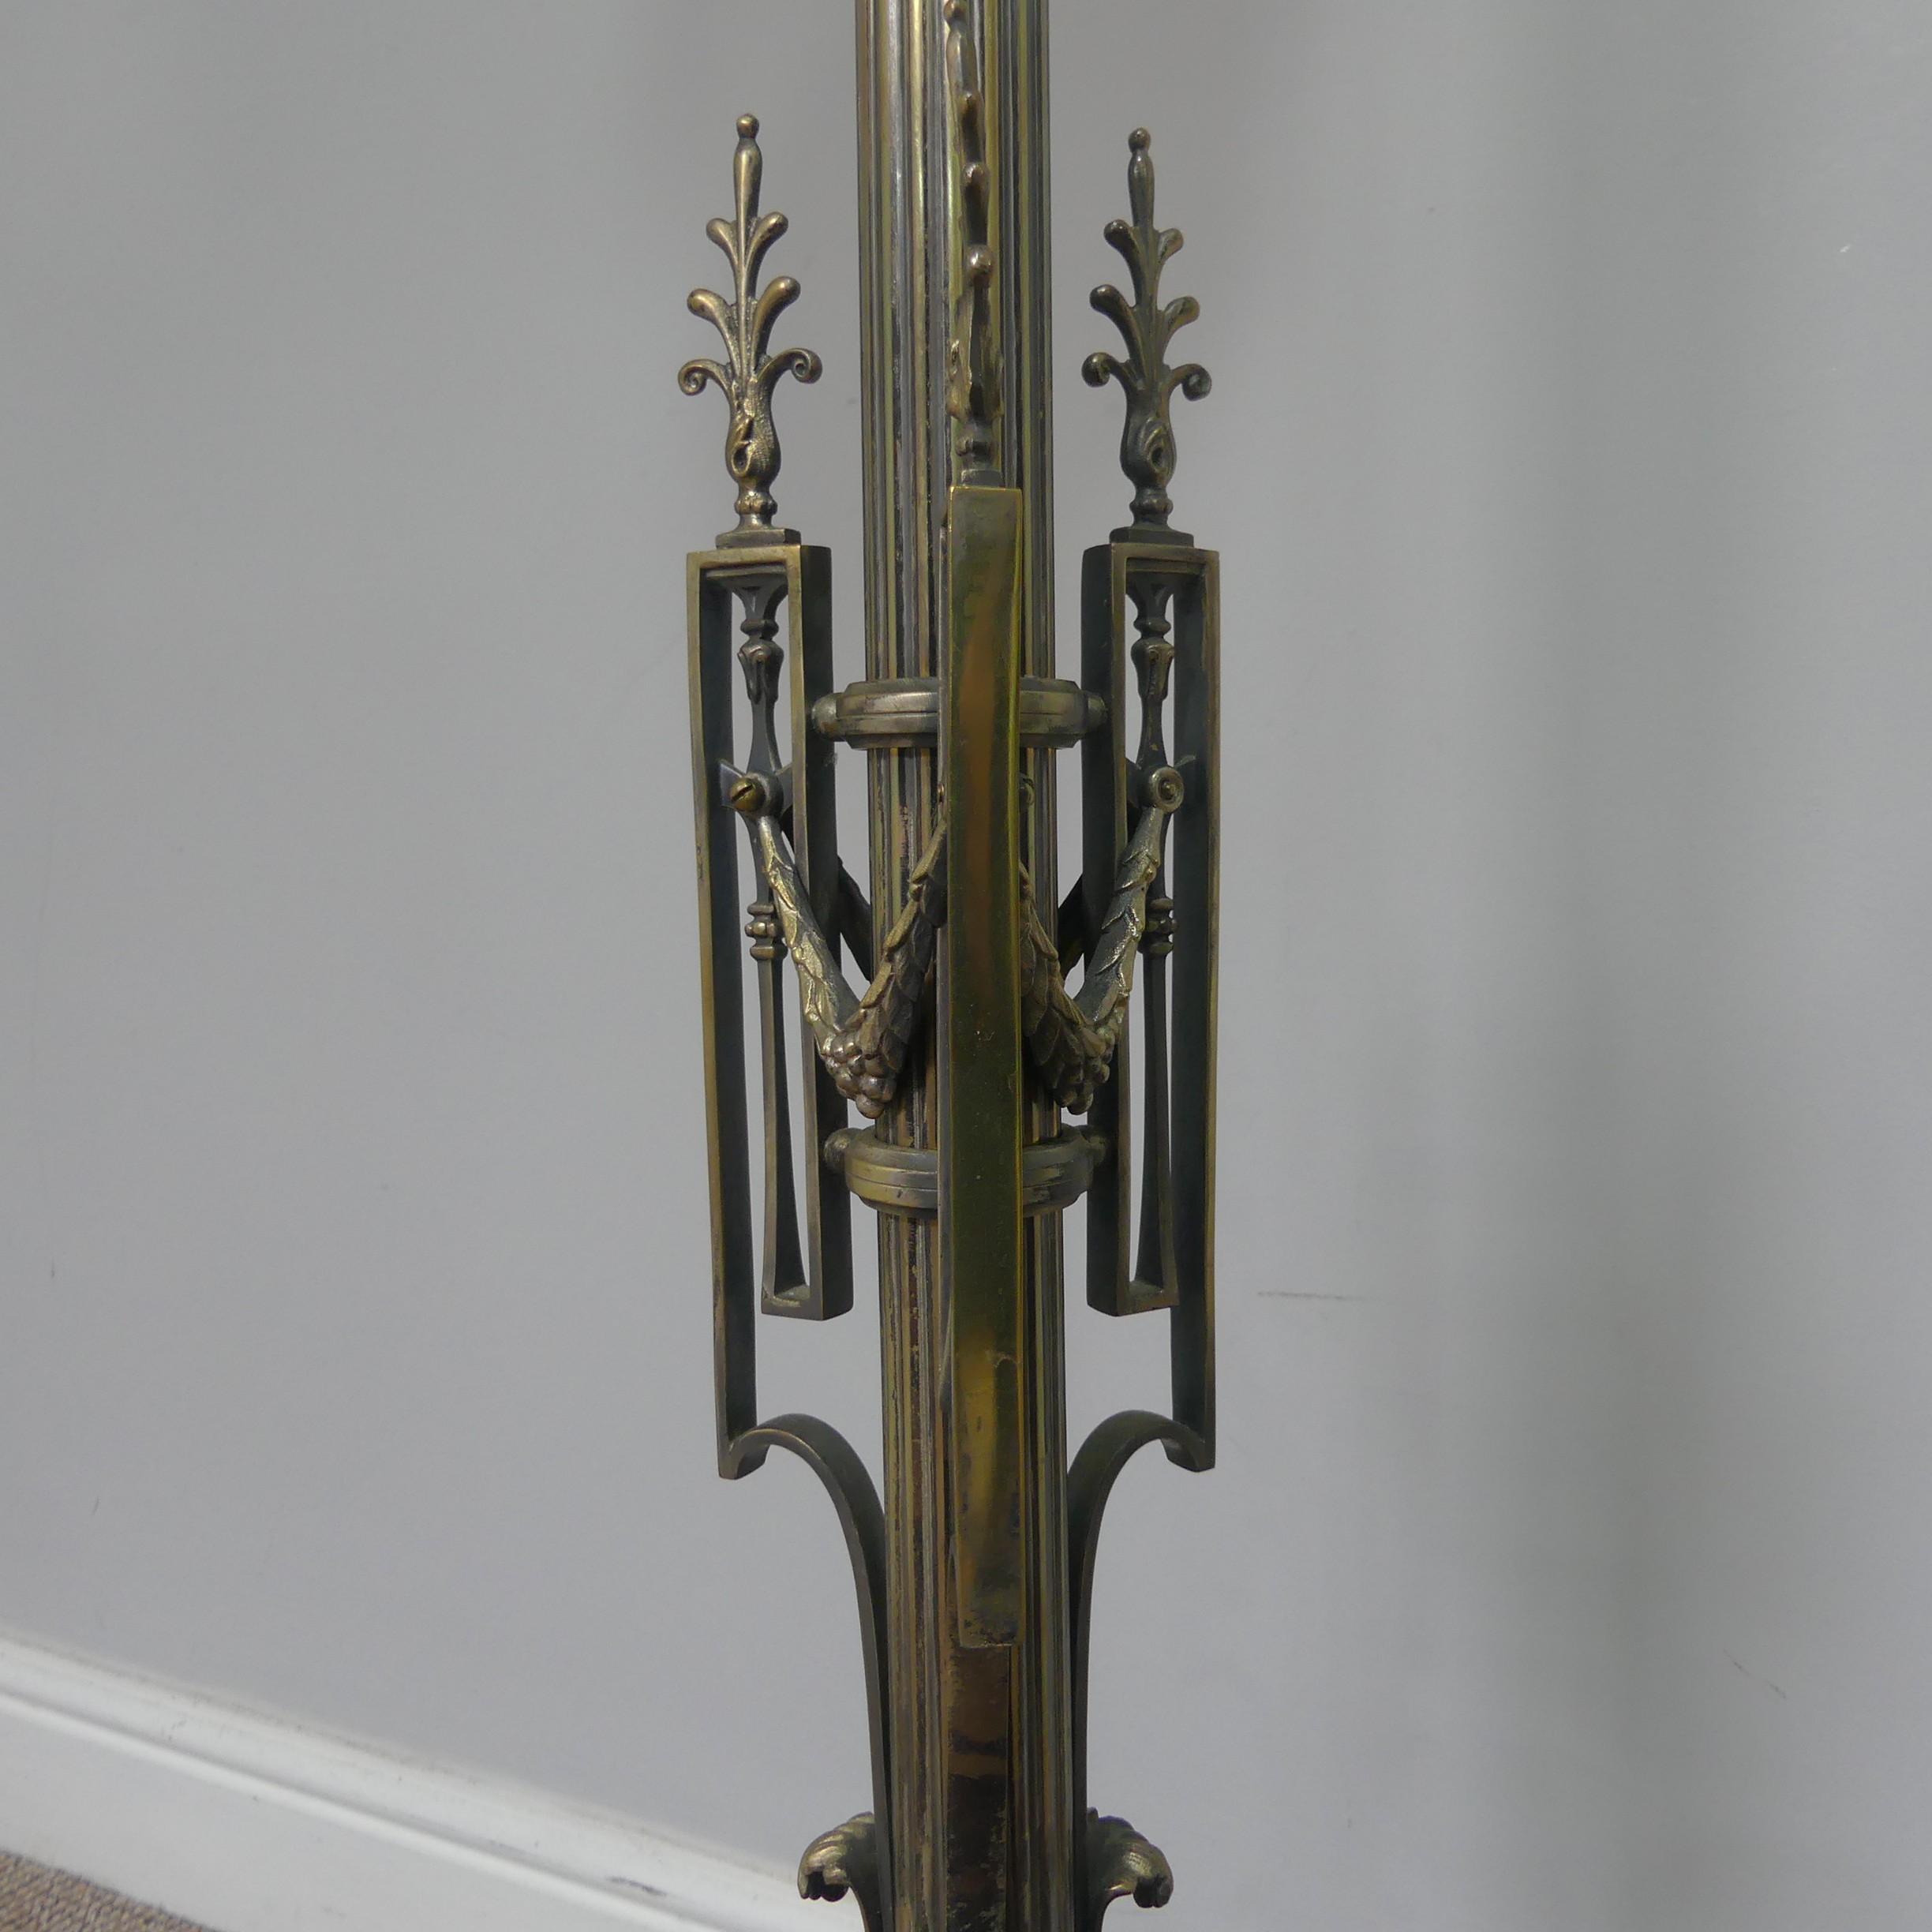 A Late 19thC/Early 20thC Brass standard Oil Lamp, with decorative reeded column, brass font and - Image 3 of 9